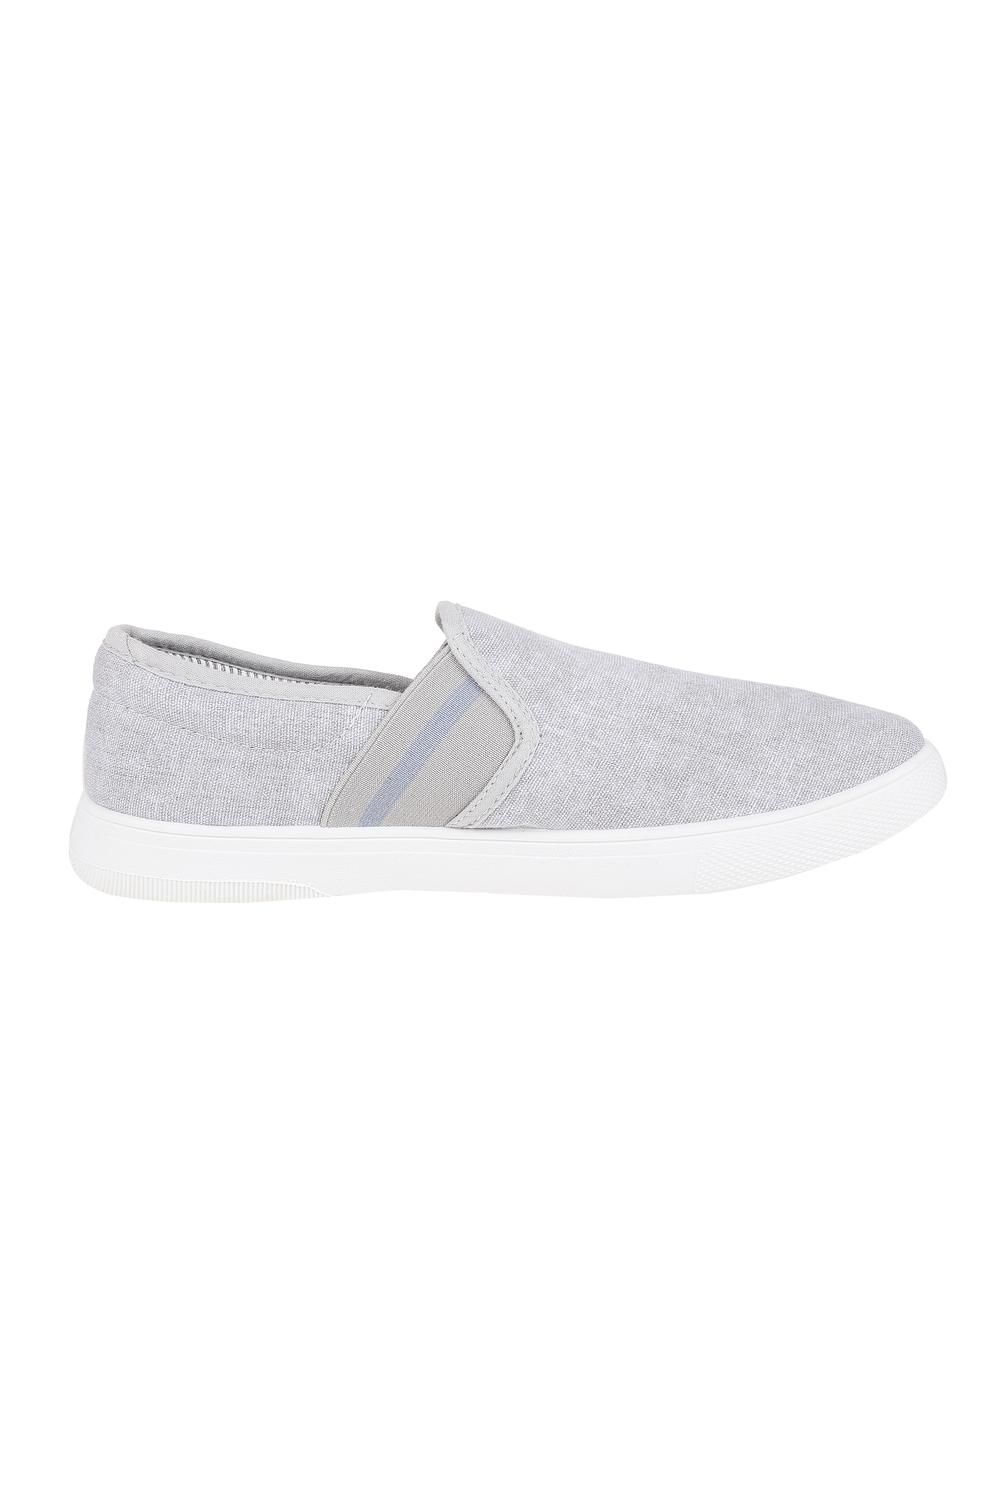 peter england slip on shoes